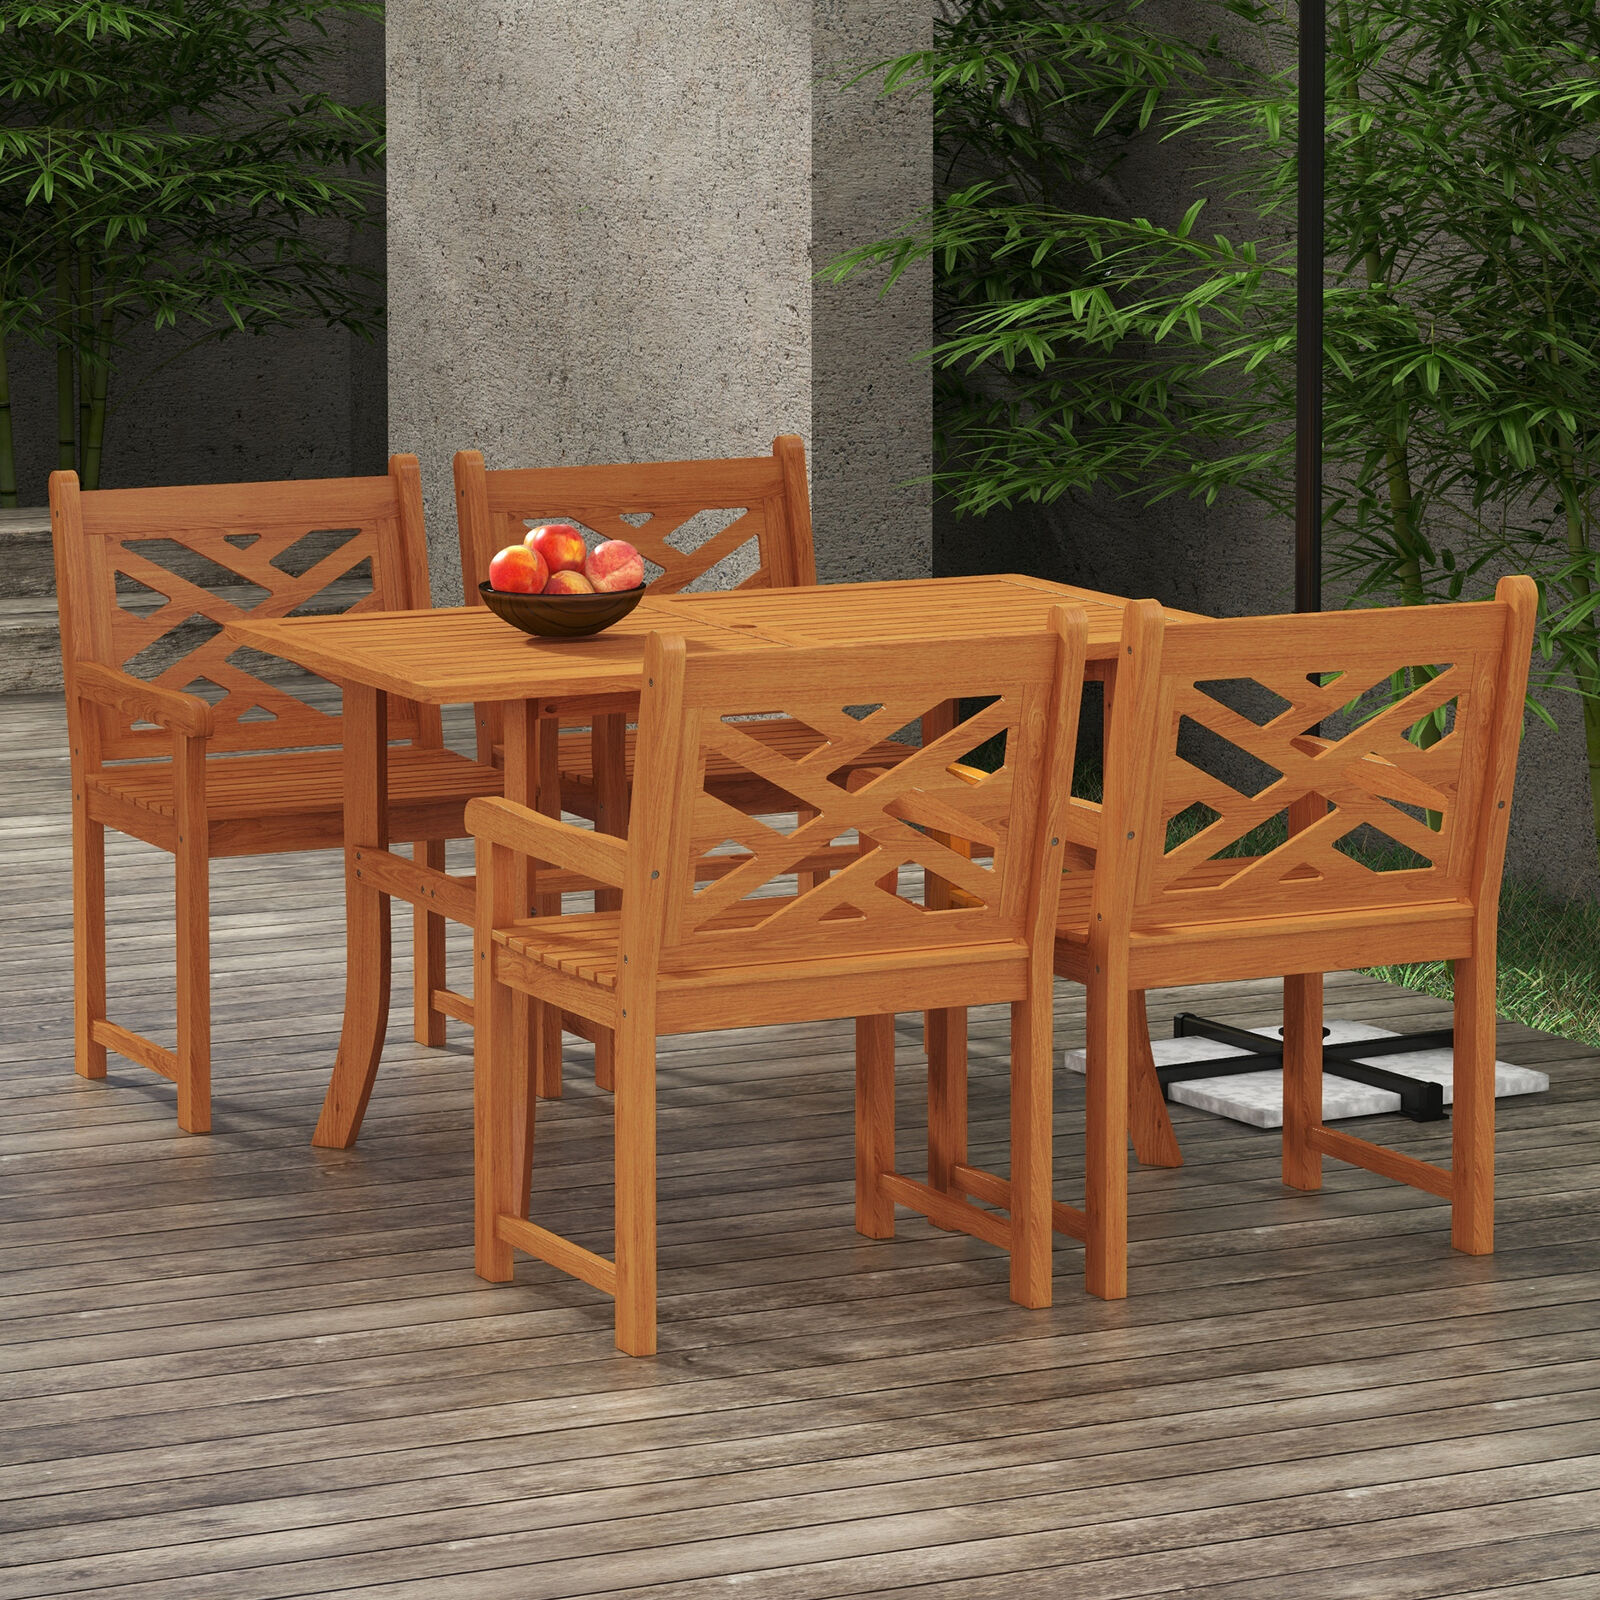 Outsunny Patio Table and Chairs Set of 4 w/ Slatted Top Table & Seat, Teak